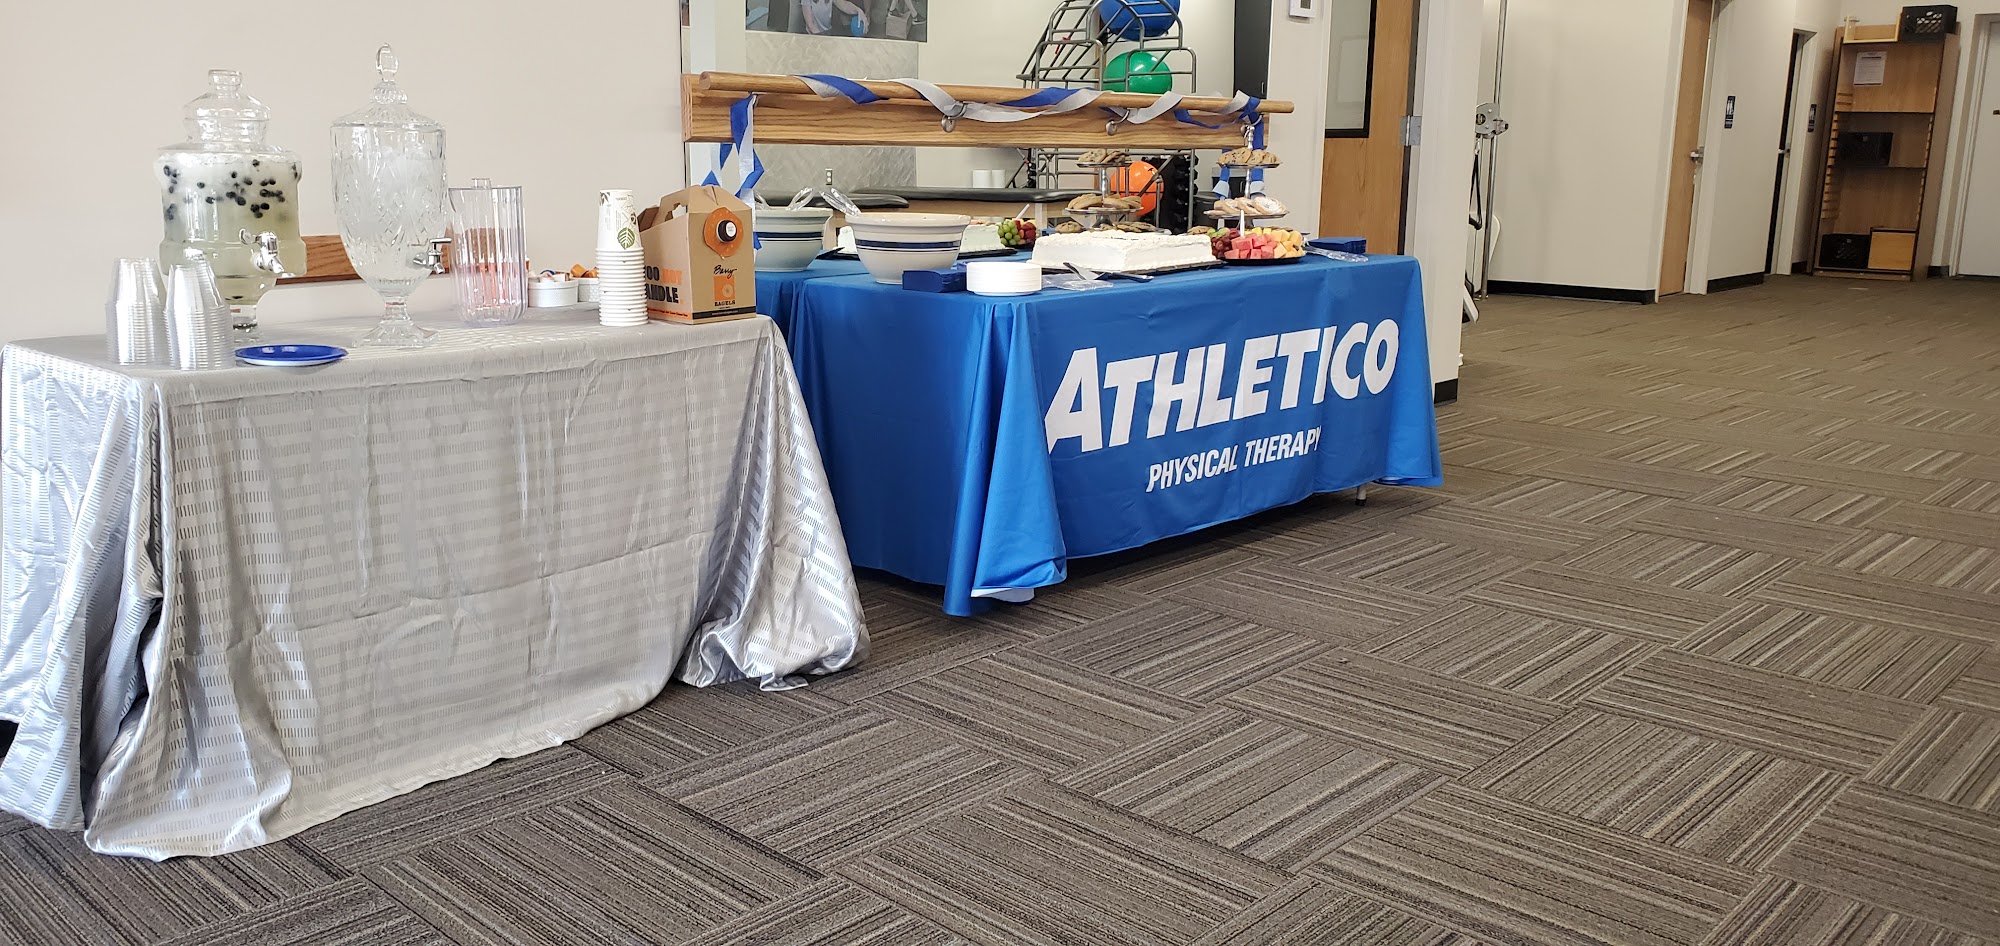 Athletico Physical Therapy - Perrysburg